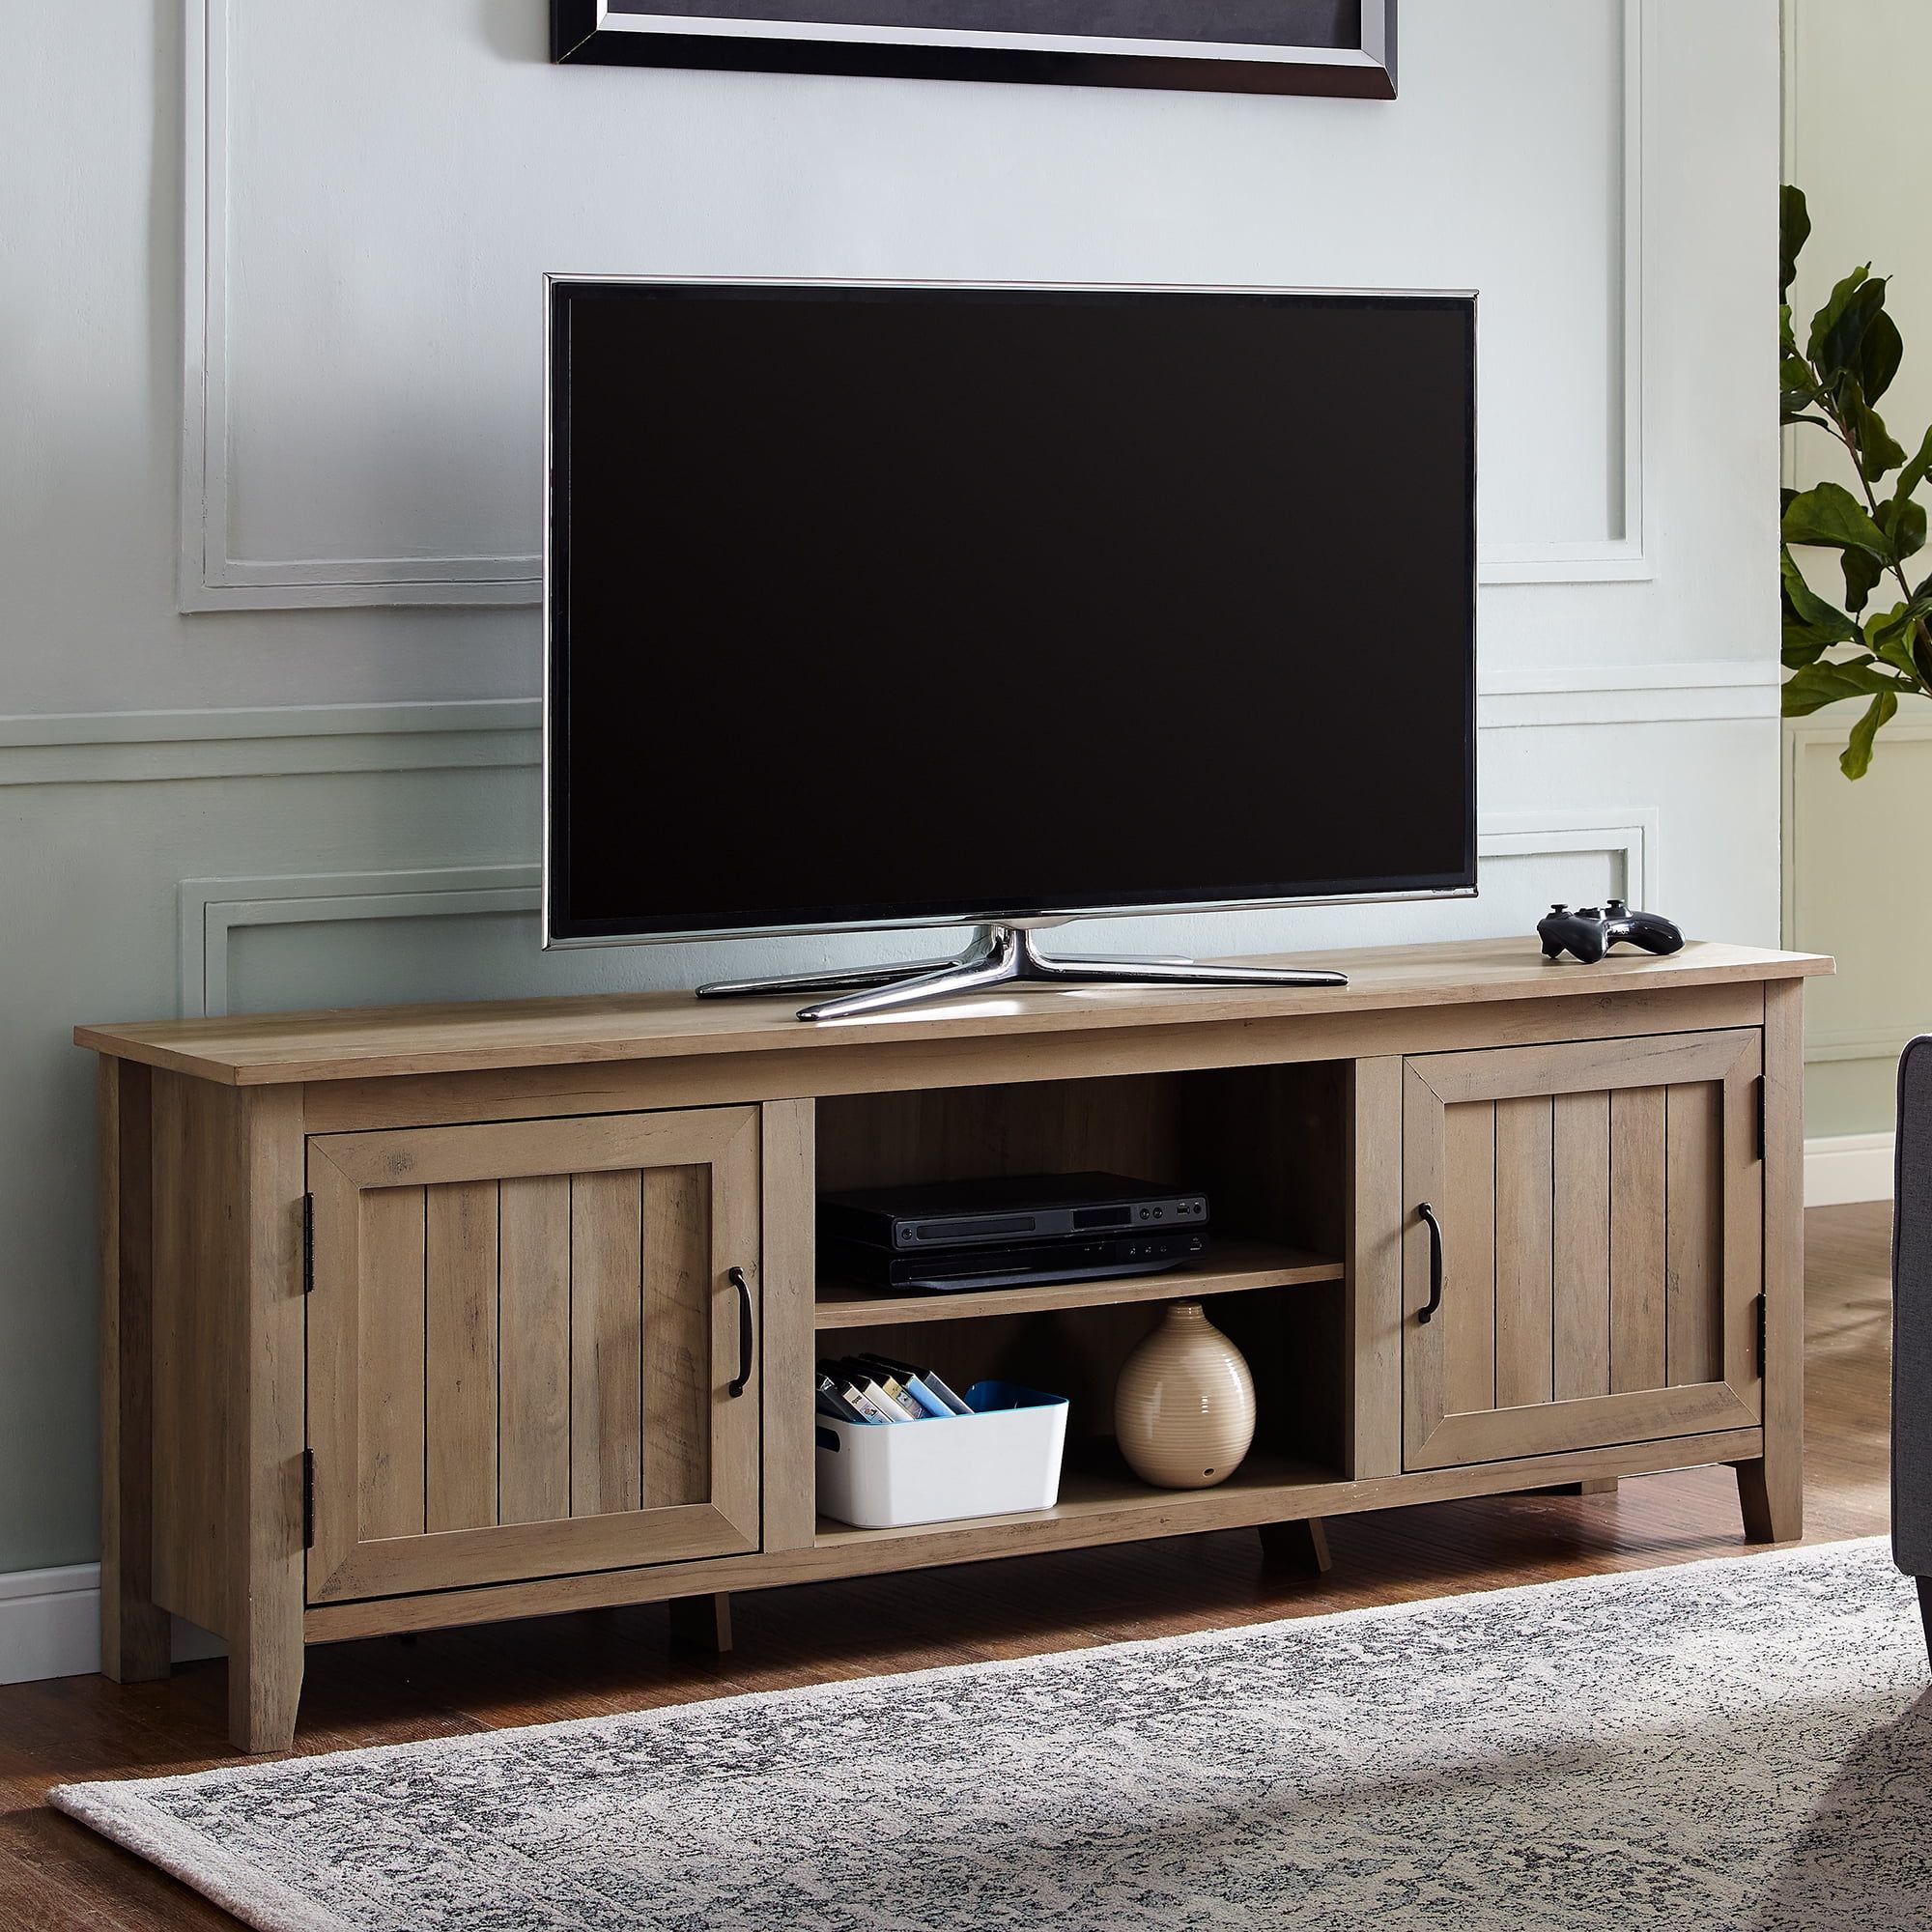 Manor Park Farmhouse Tv Stand For Tvs Up To 80", Reclaimed Barnwood Intended For Farmhouse Rattan Tv Stands (View 13 of 20)